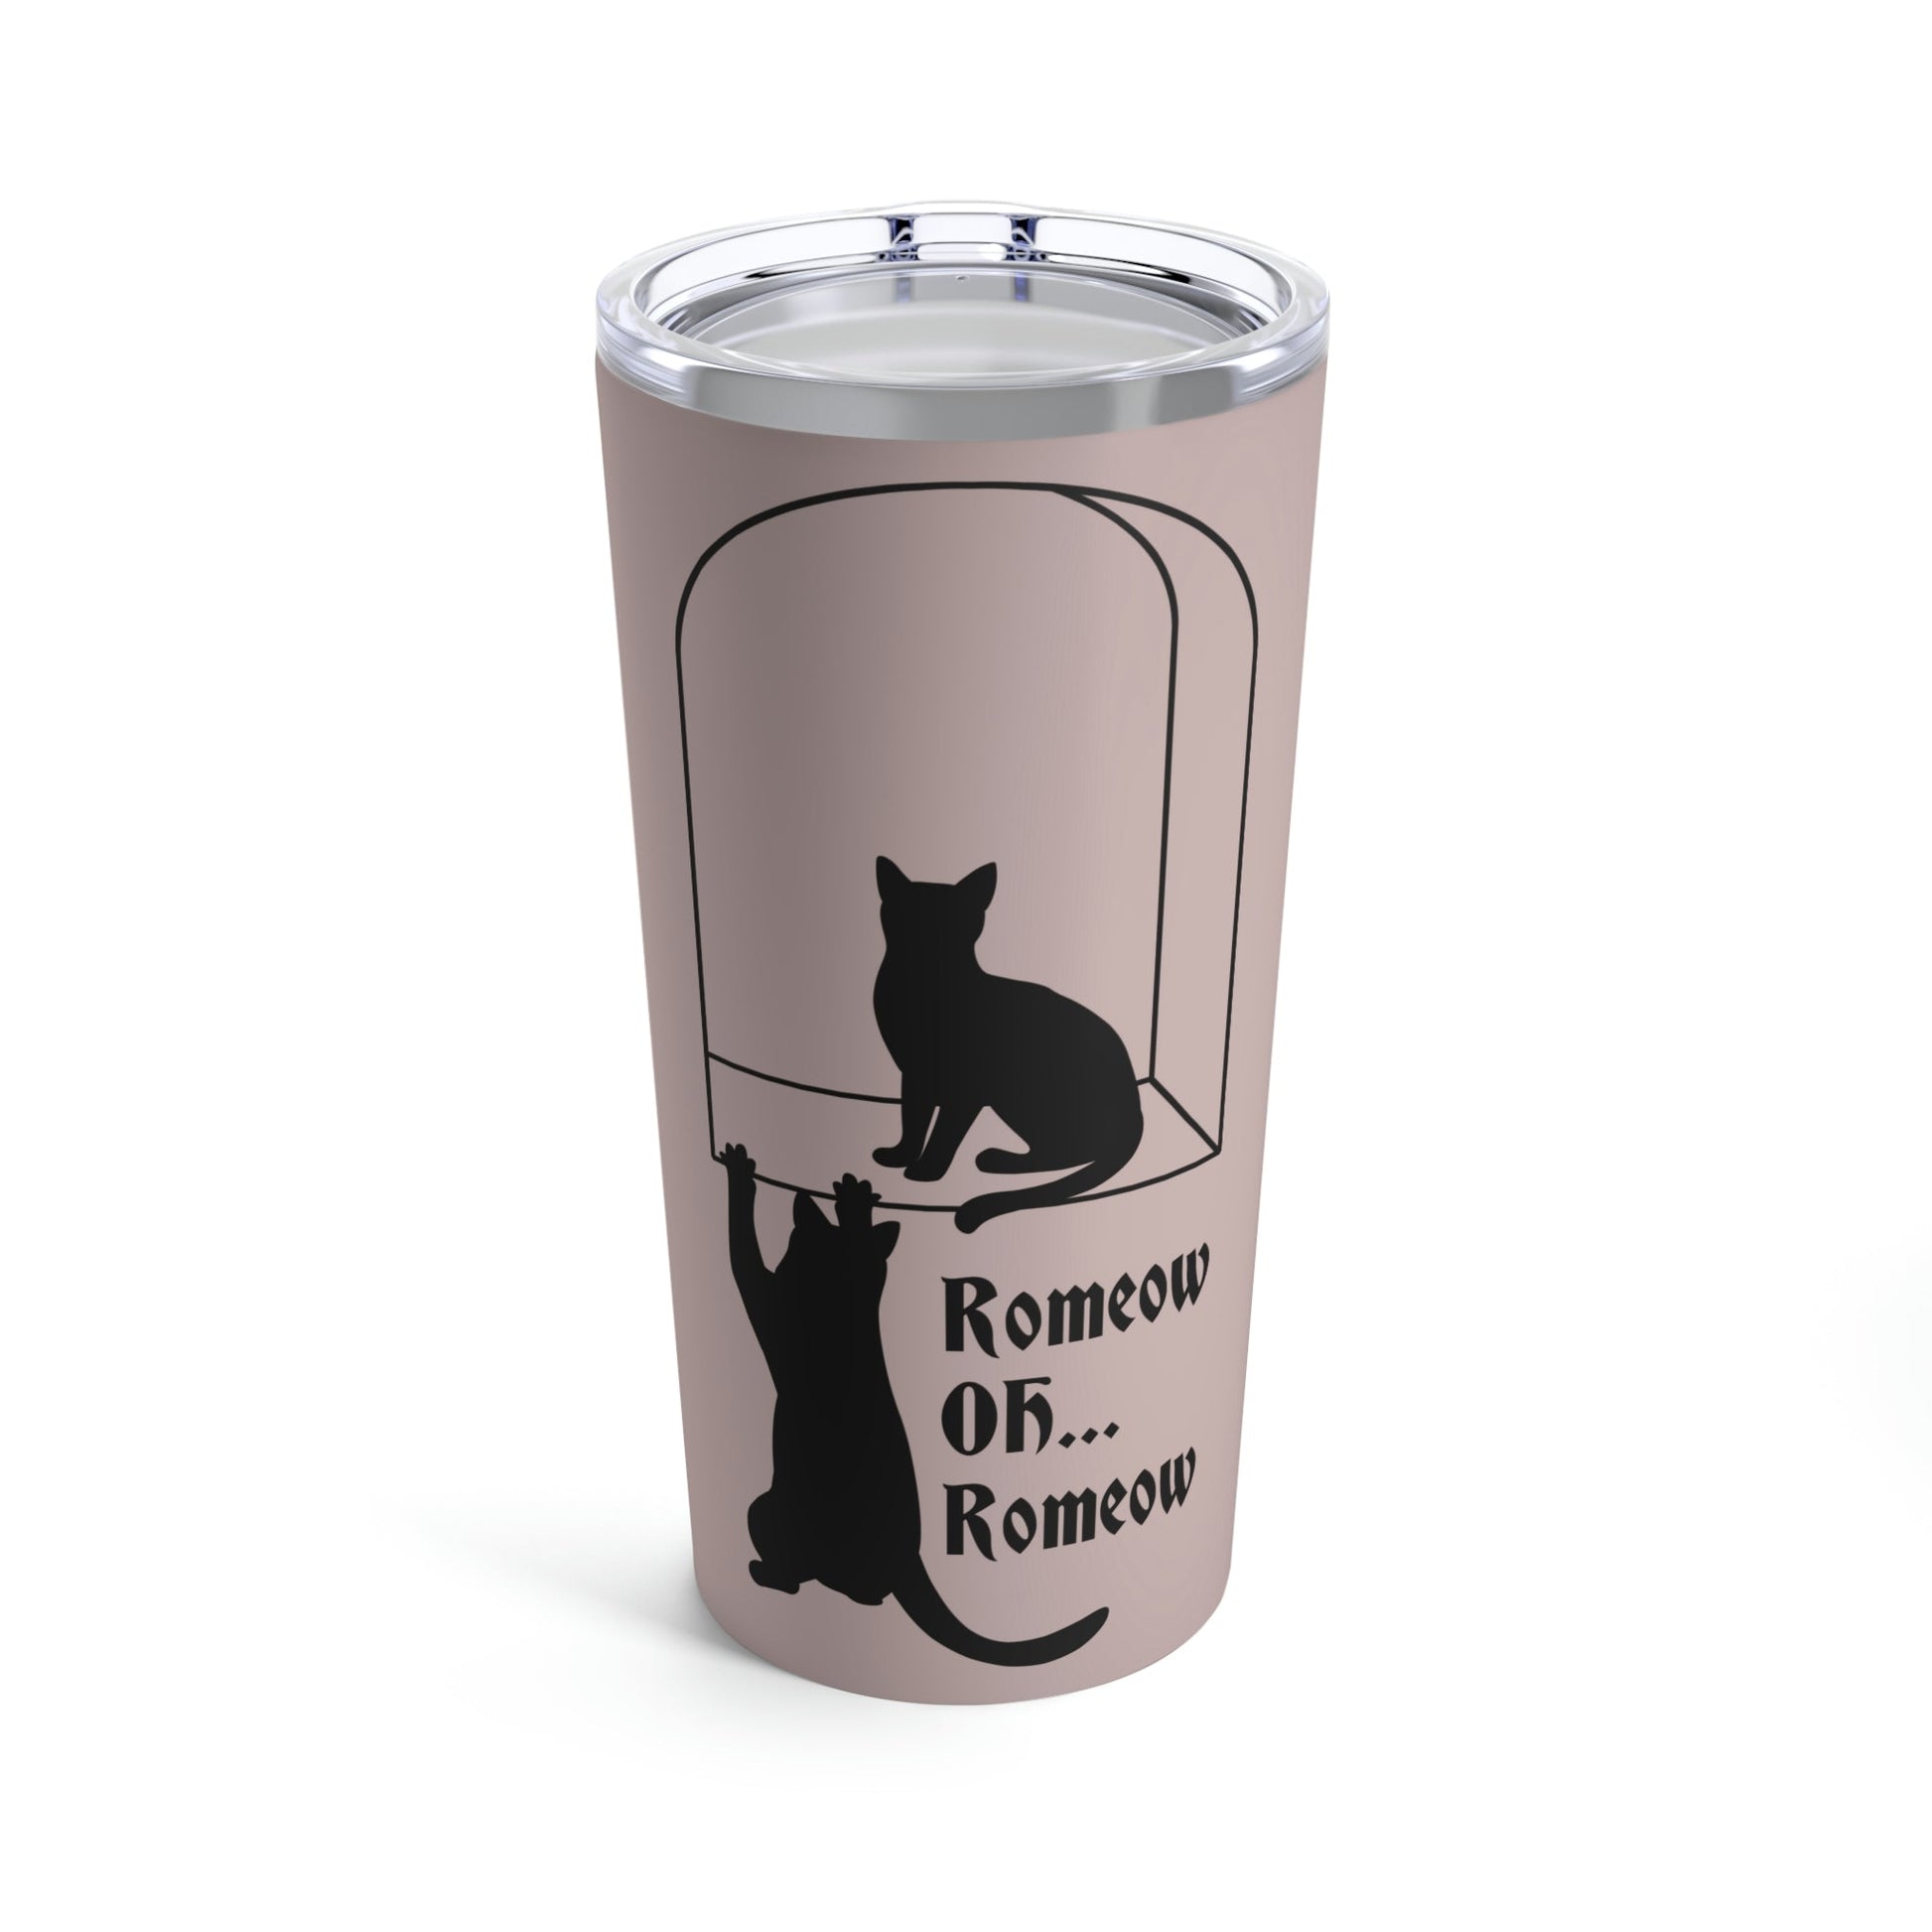 Romeow and Mewliet. William Shakespeare Romeo And Juliet Black Cat Beige Stainless Steel Hot or Cold Vacuum Tumbler 20oz Ichaku [Perfect Gifts Selection]